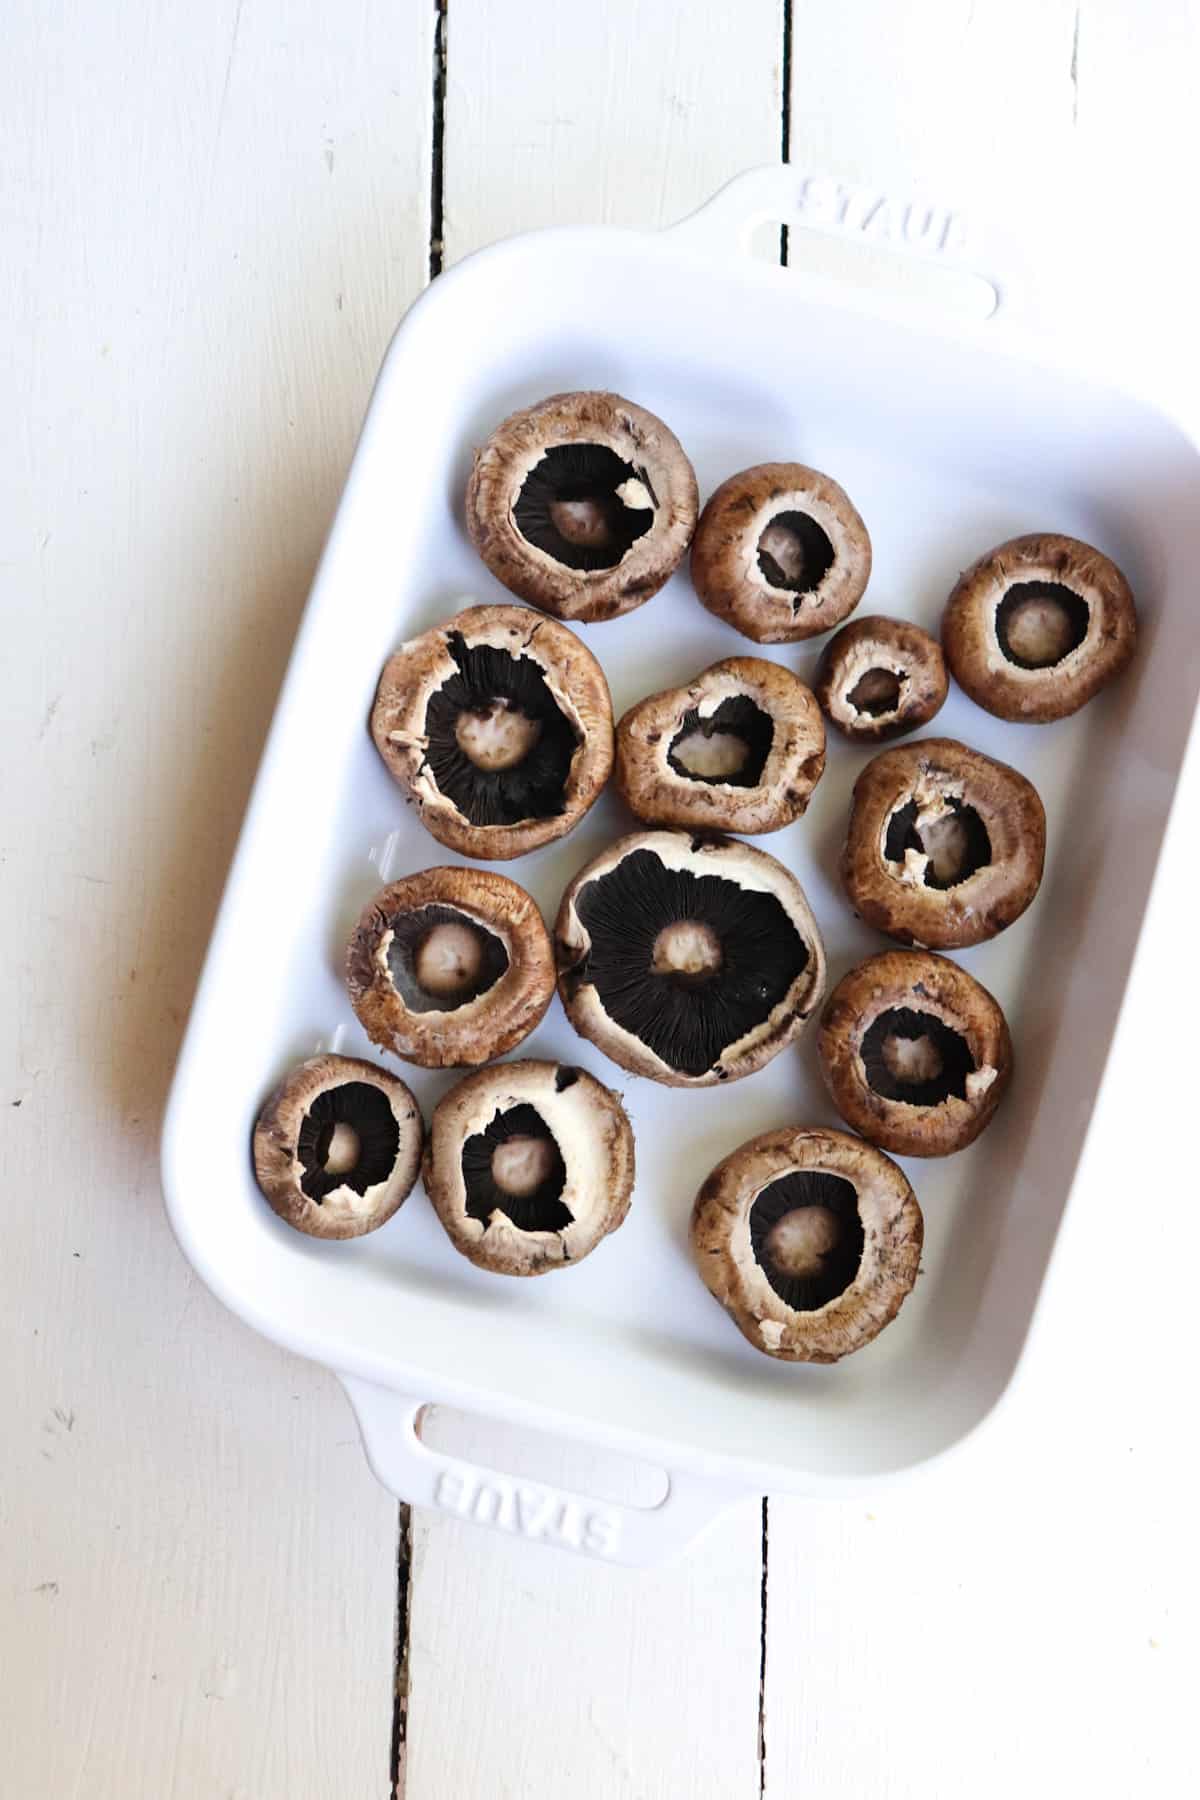 mushroom caps with stems removed in a white baking dish.